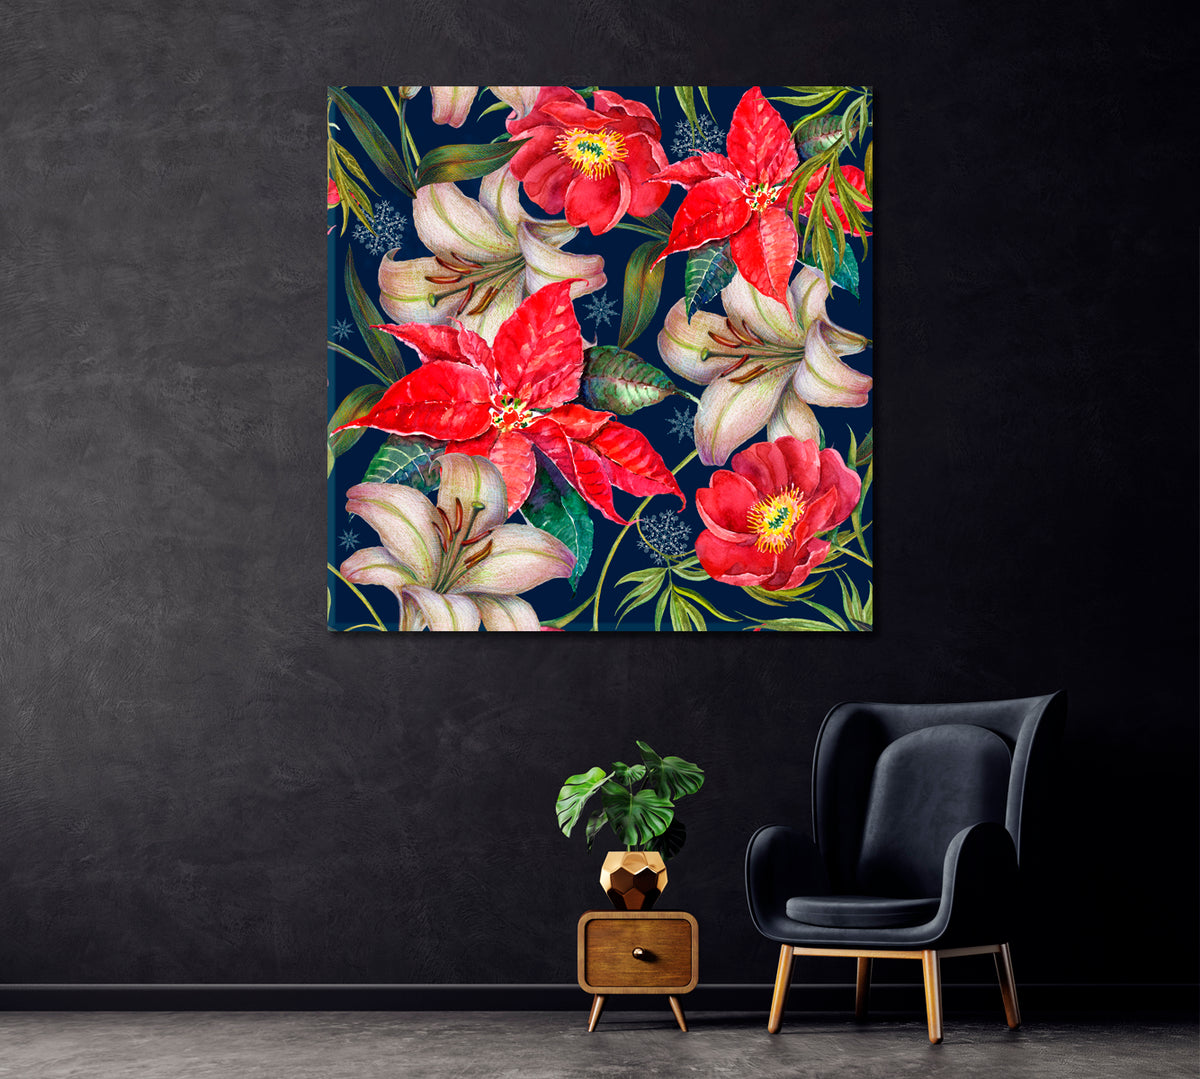 Christmas Flowers Canvas Print ArtLexy 1 Panel 12"x12" inches 